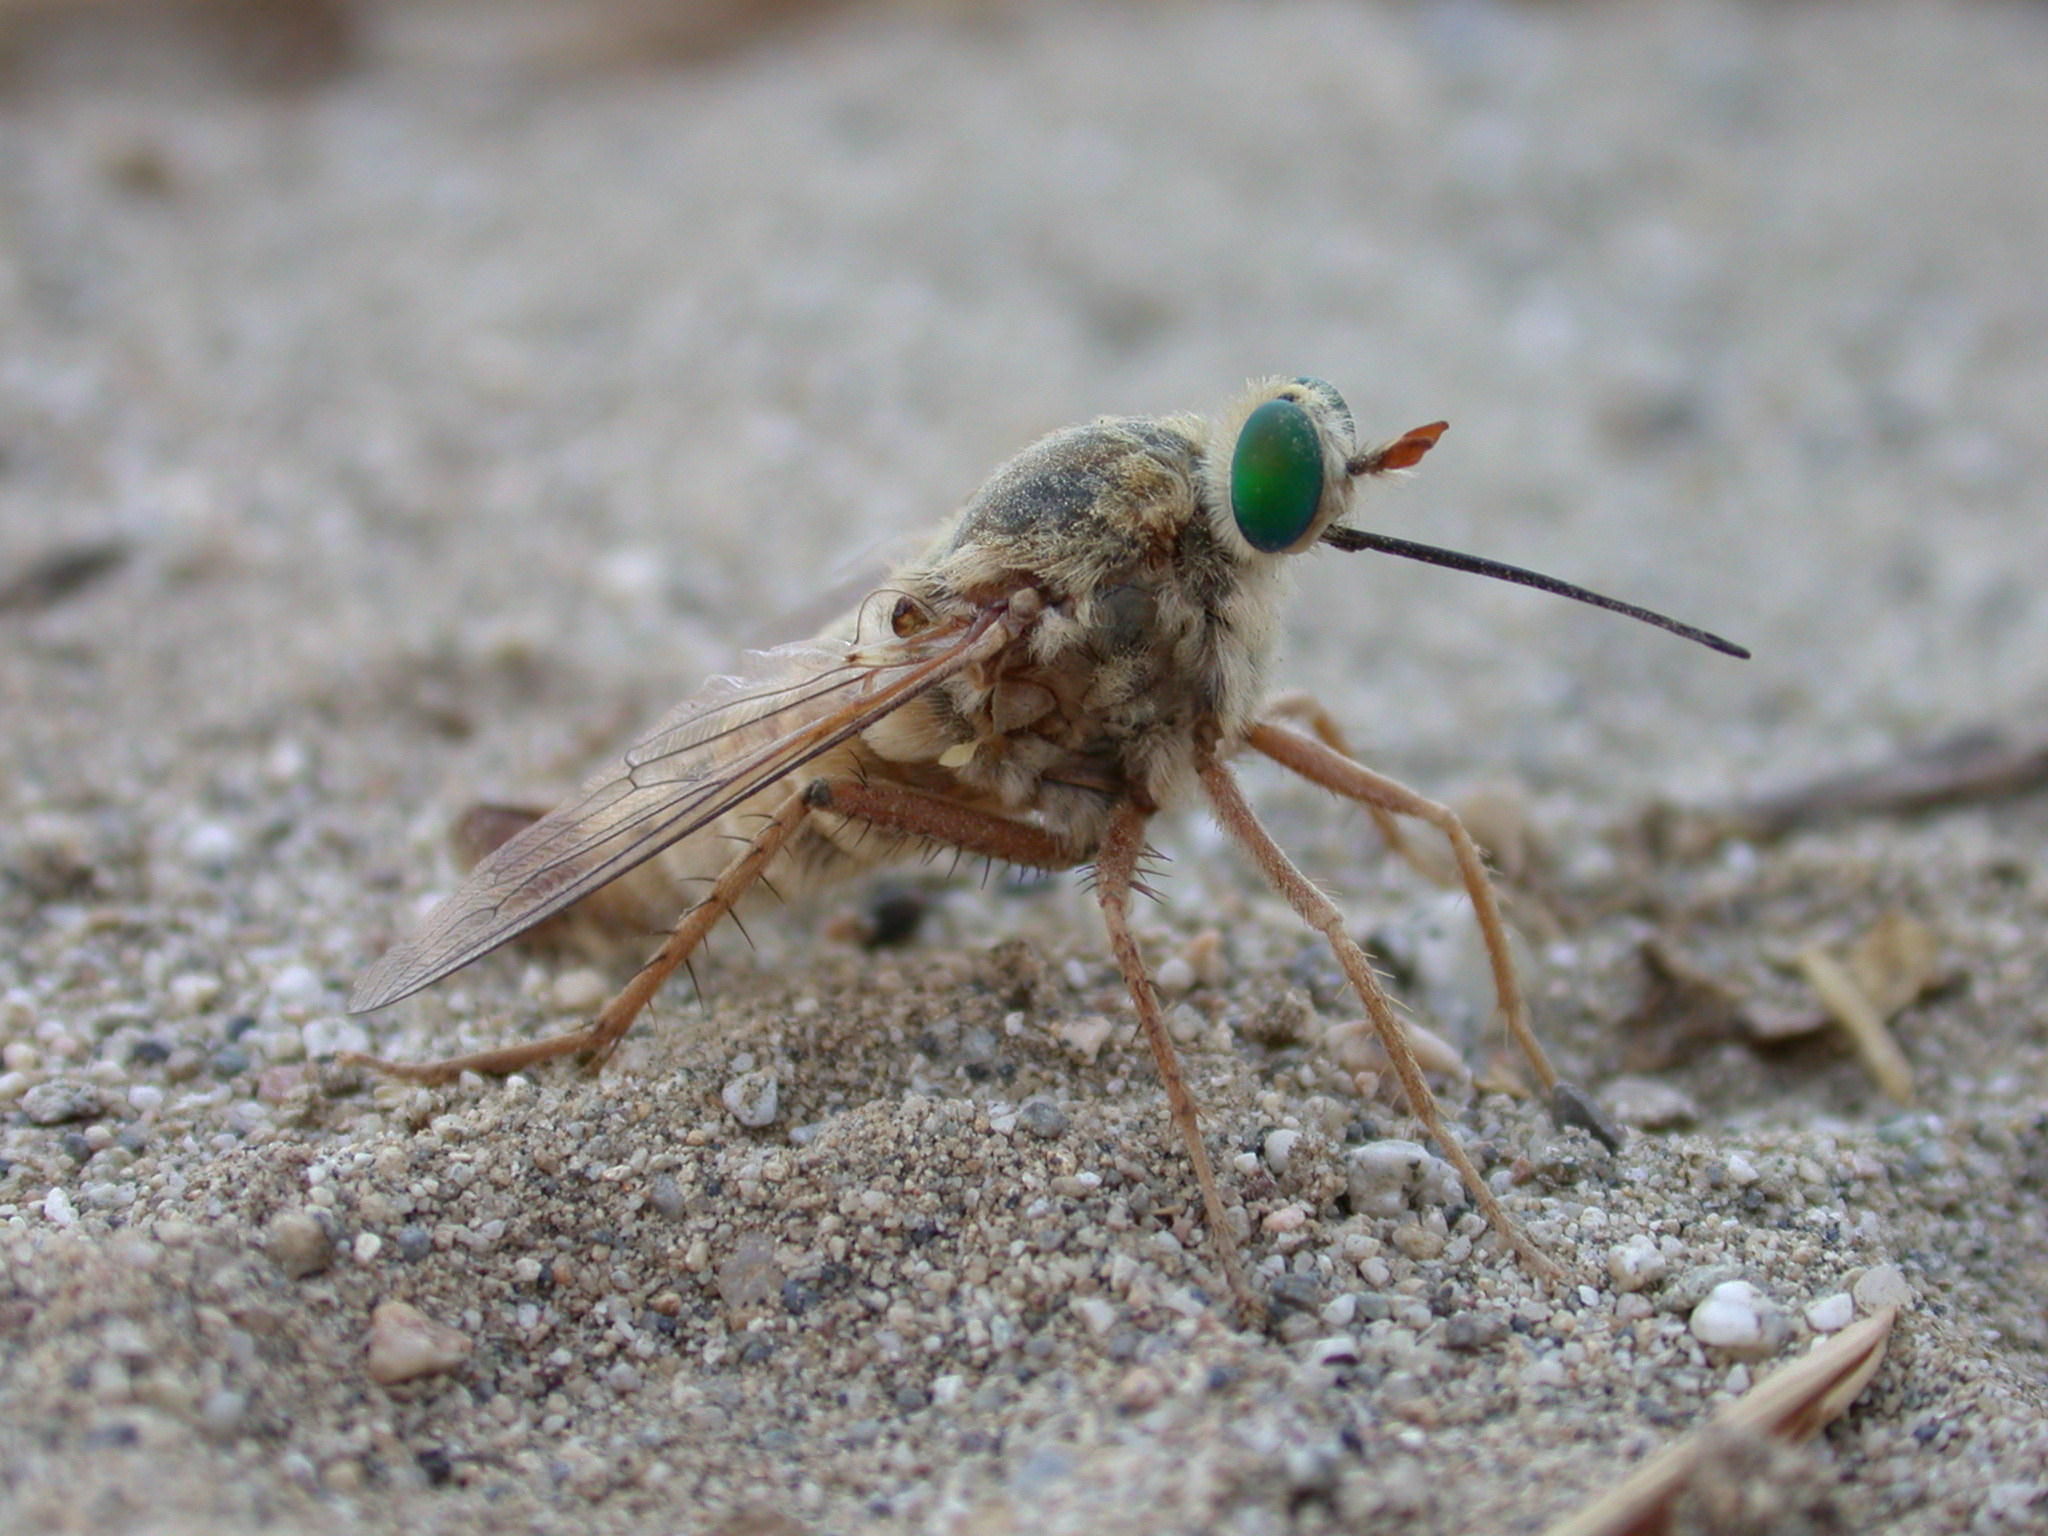 The Delhi Sands flower-loving fly is more than an inch long and has emerald-green eyes